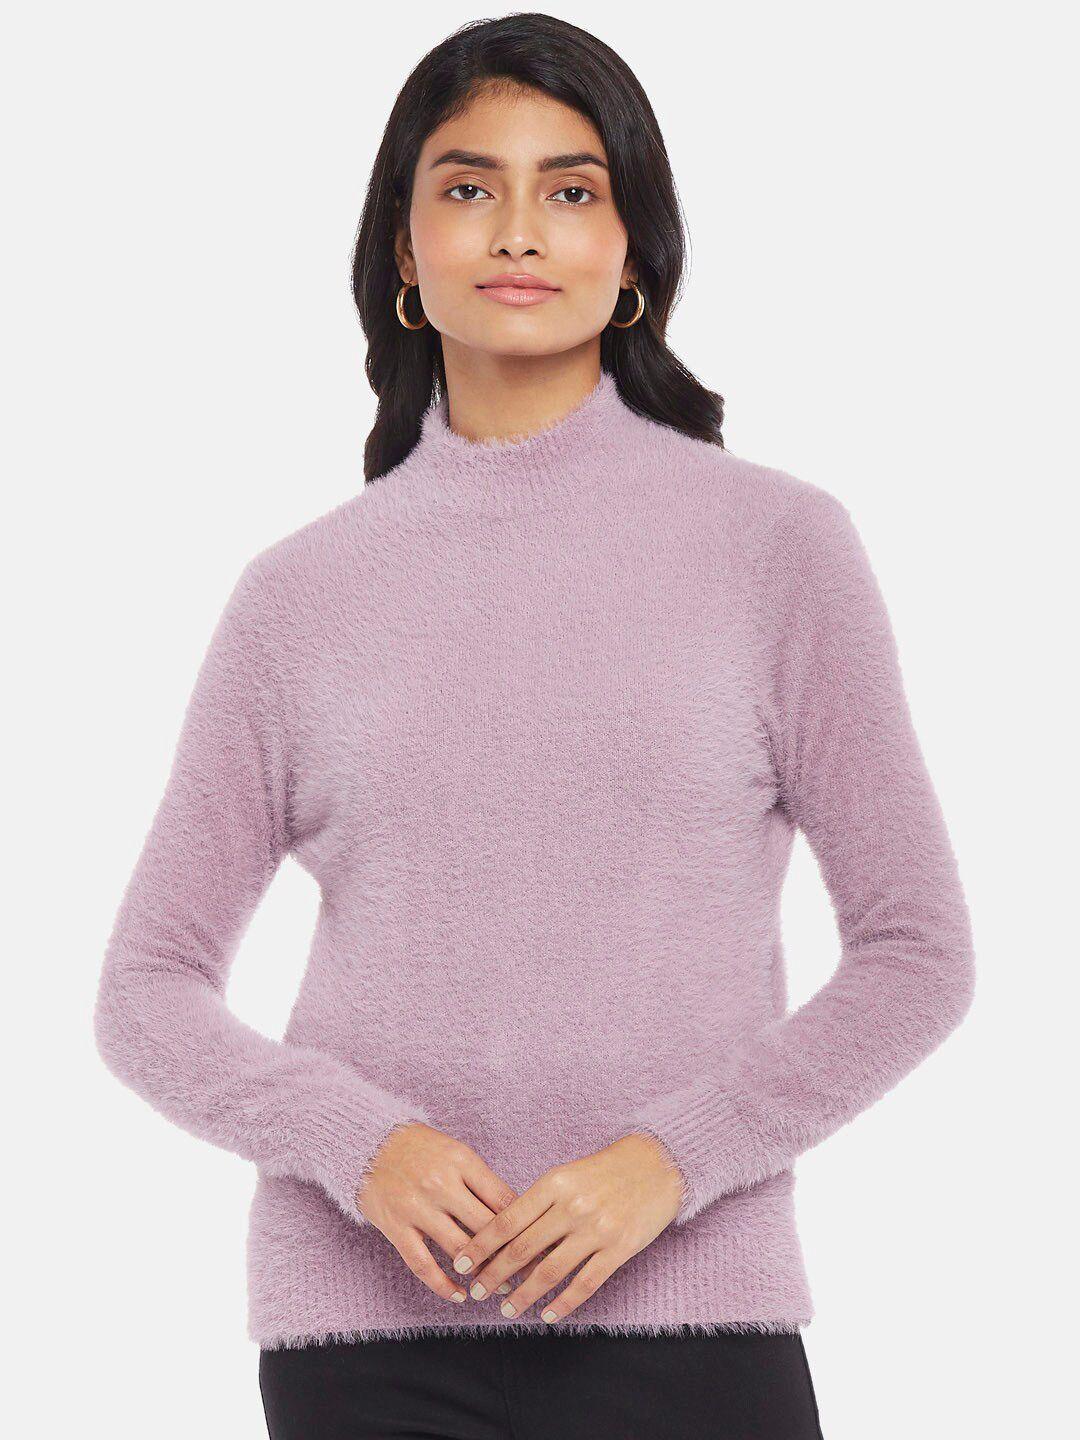 honey by pantaloons women lavender solid pullover sweater